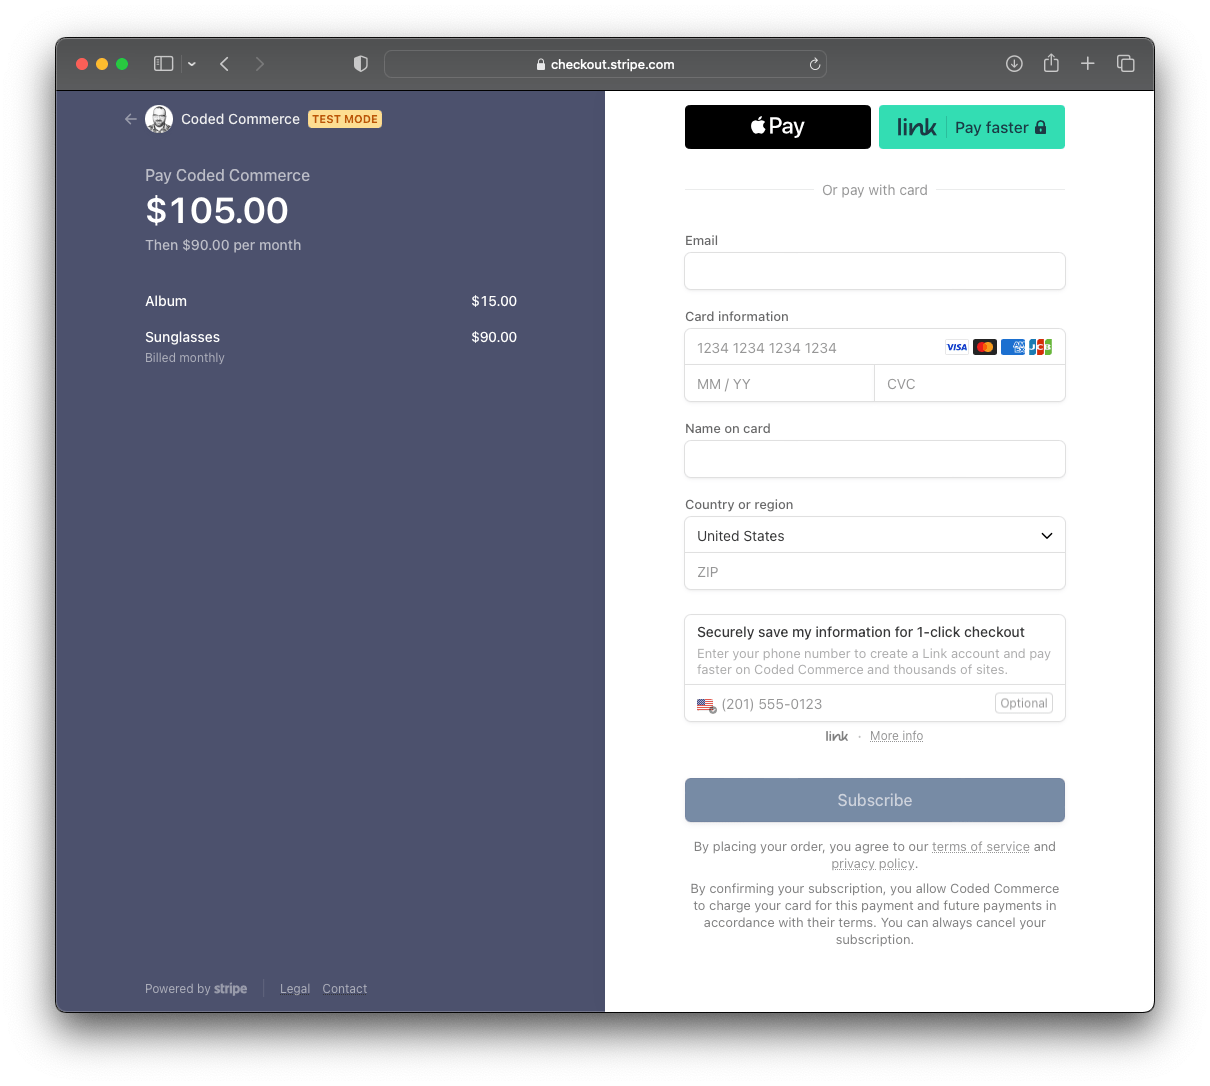 Sample Stripe Checkout with a subscription and mixed cart